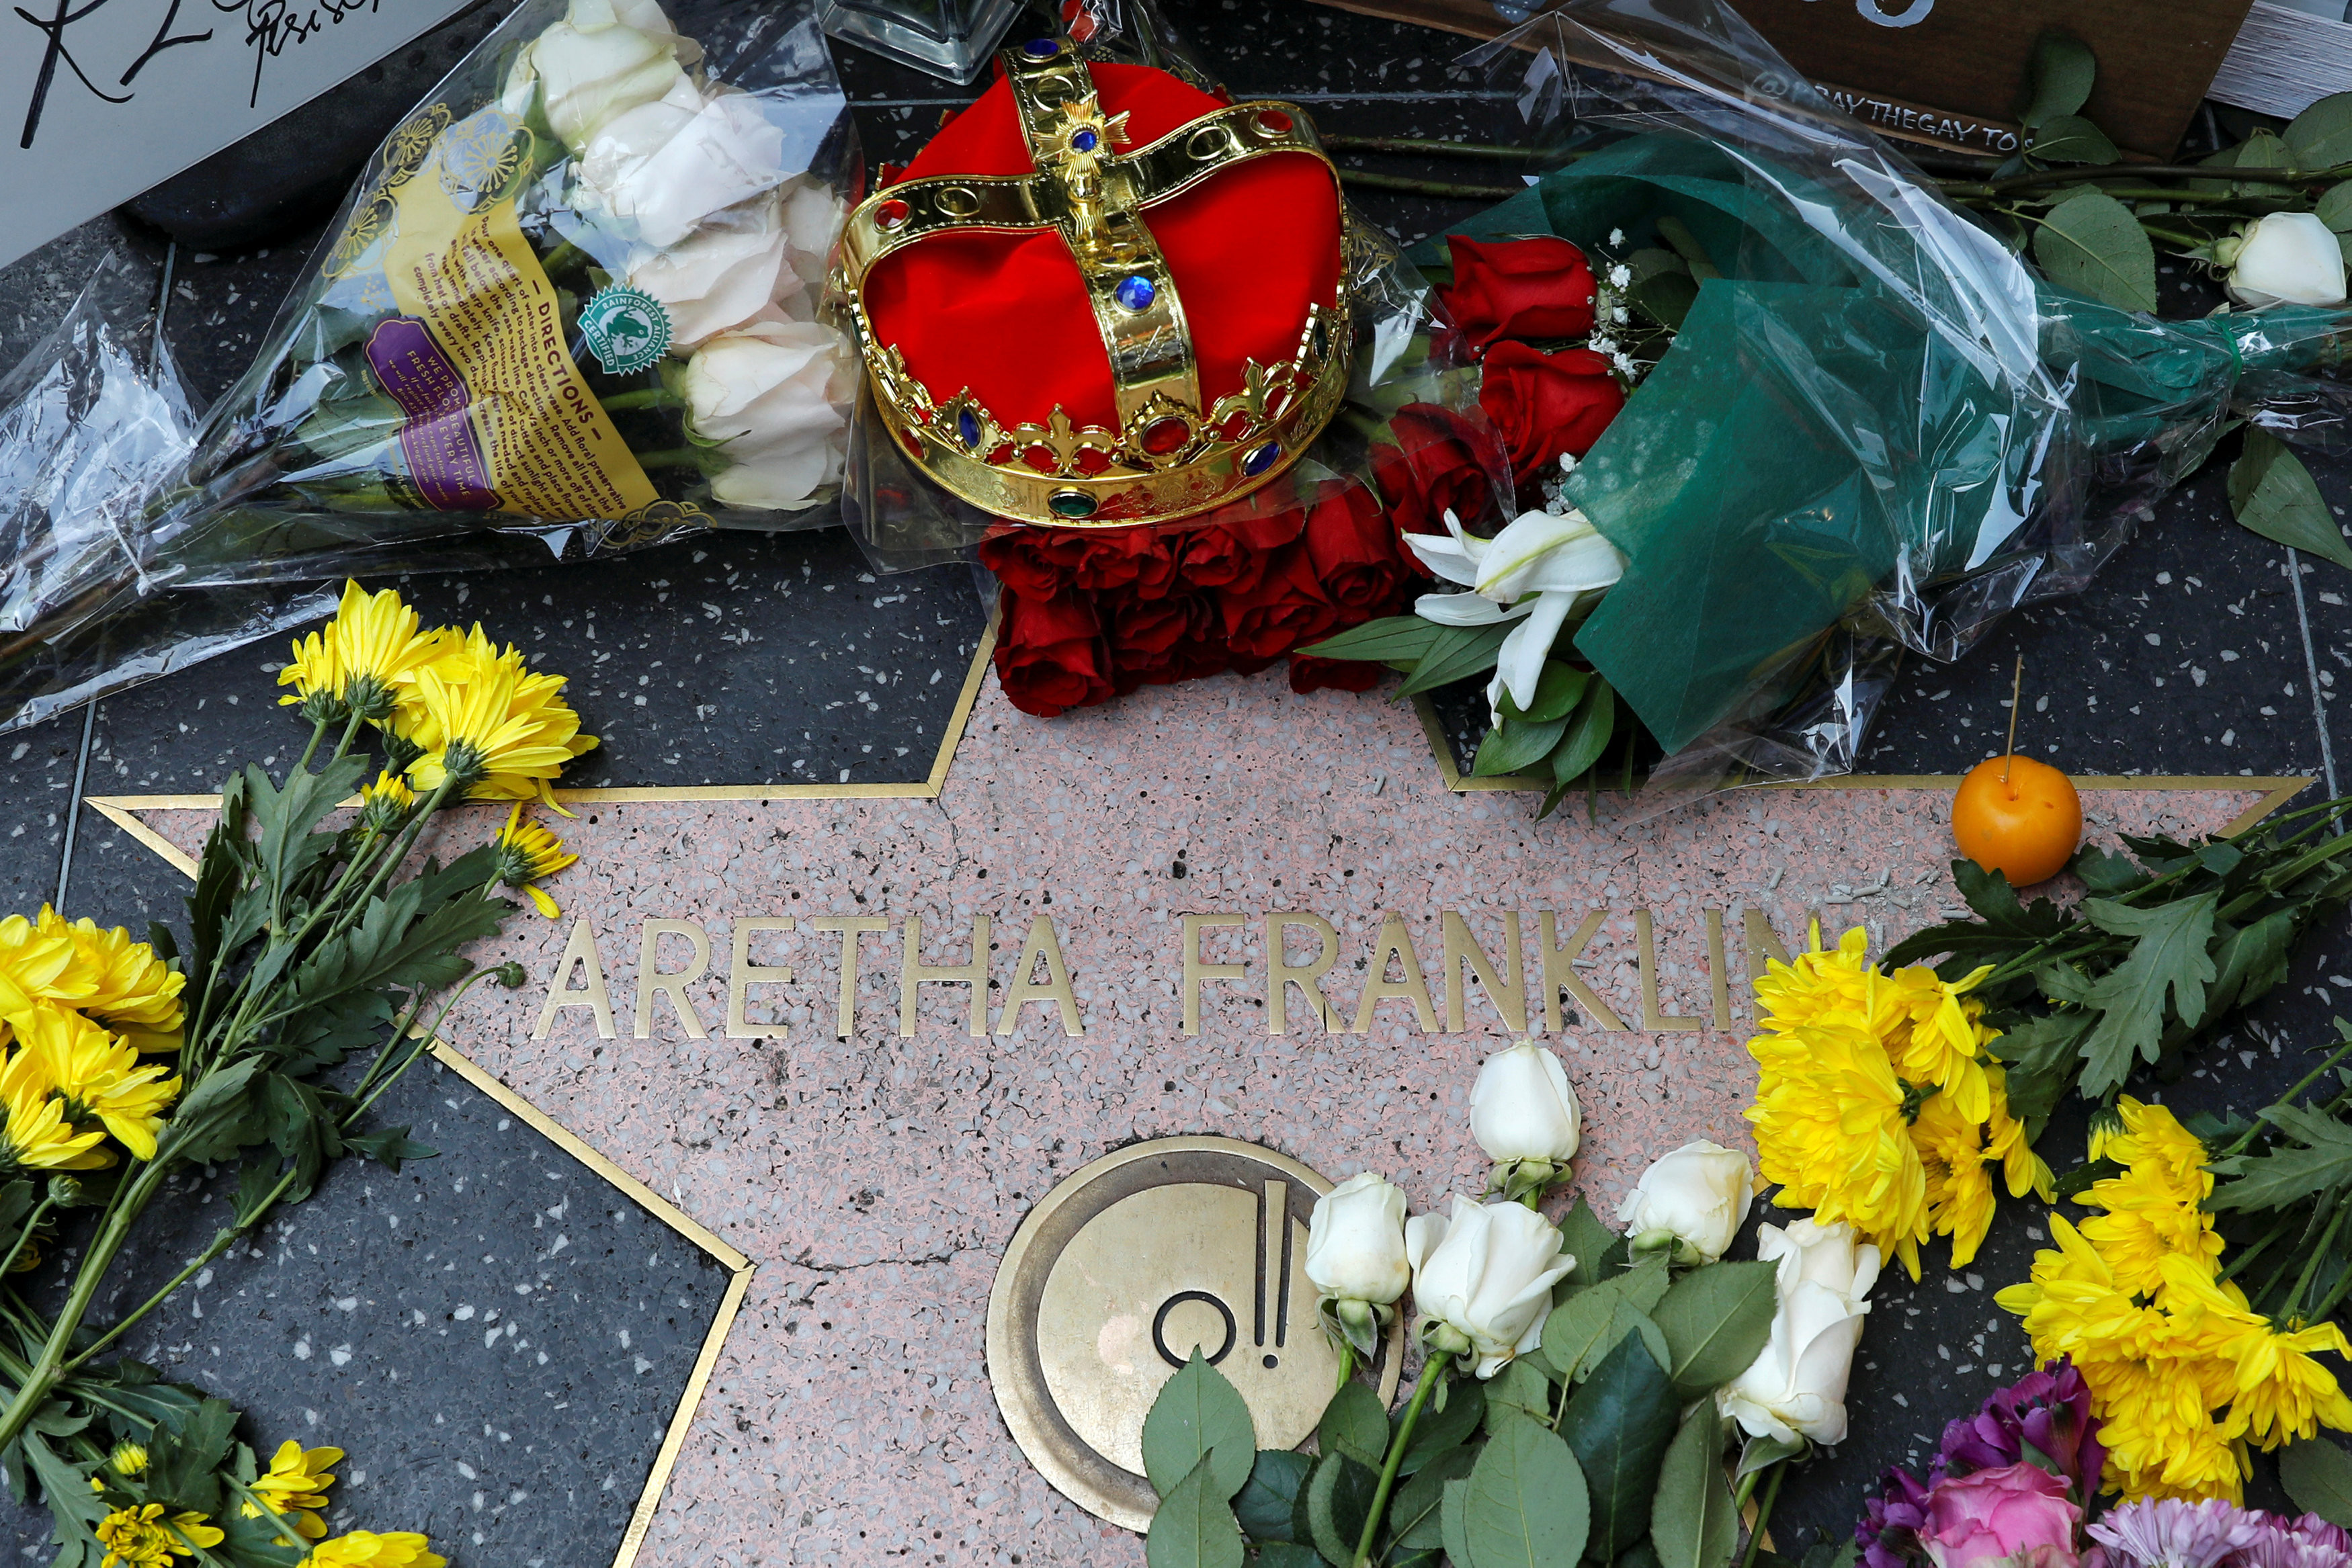 23 Lovely Vw Bug Flower Vase 2024 free download vw bug flower vase of aretha franklin funeral set for august 31 in detroit pertaining to a crown and flowers were placed on aretha franklins star on hollywood boulevard in los angeles